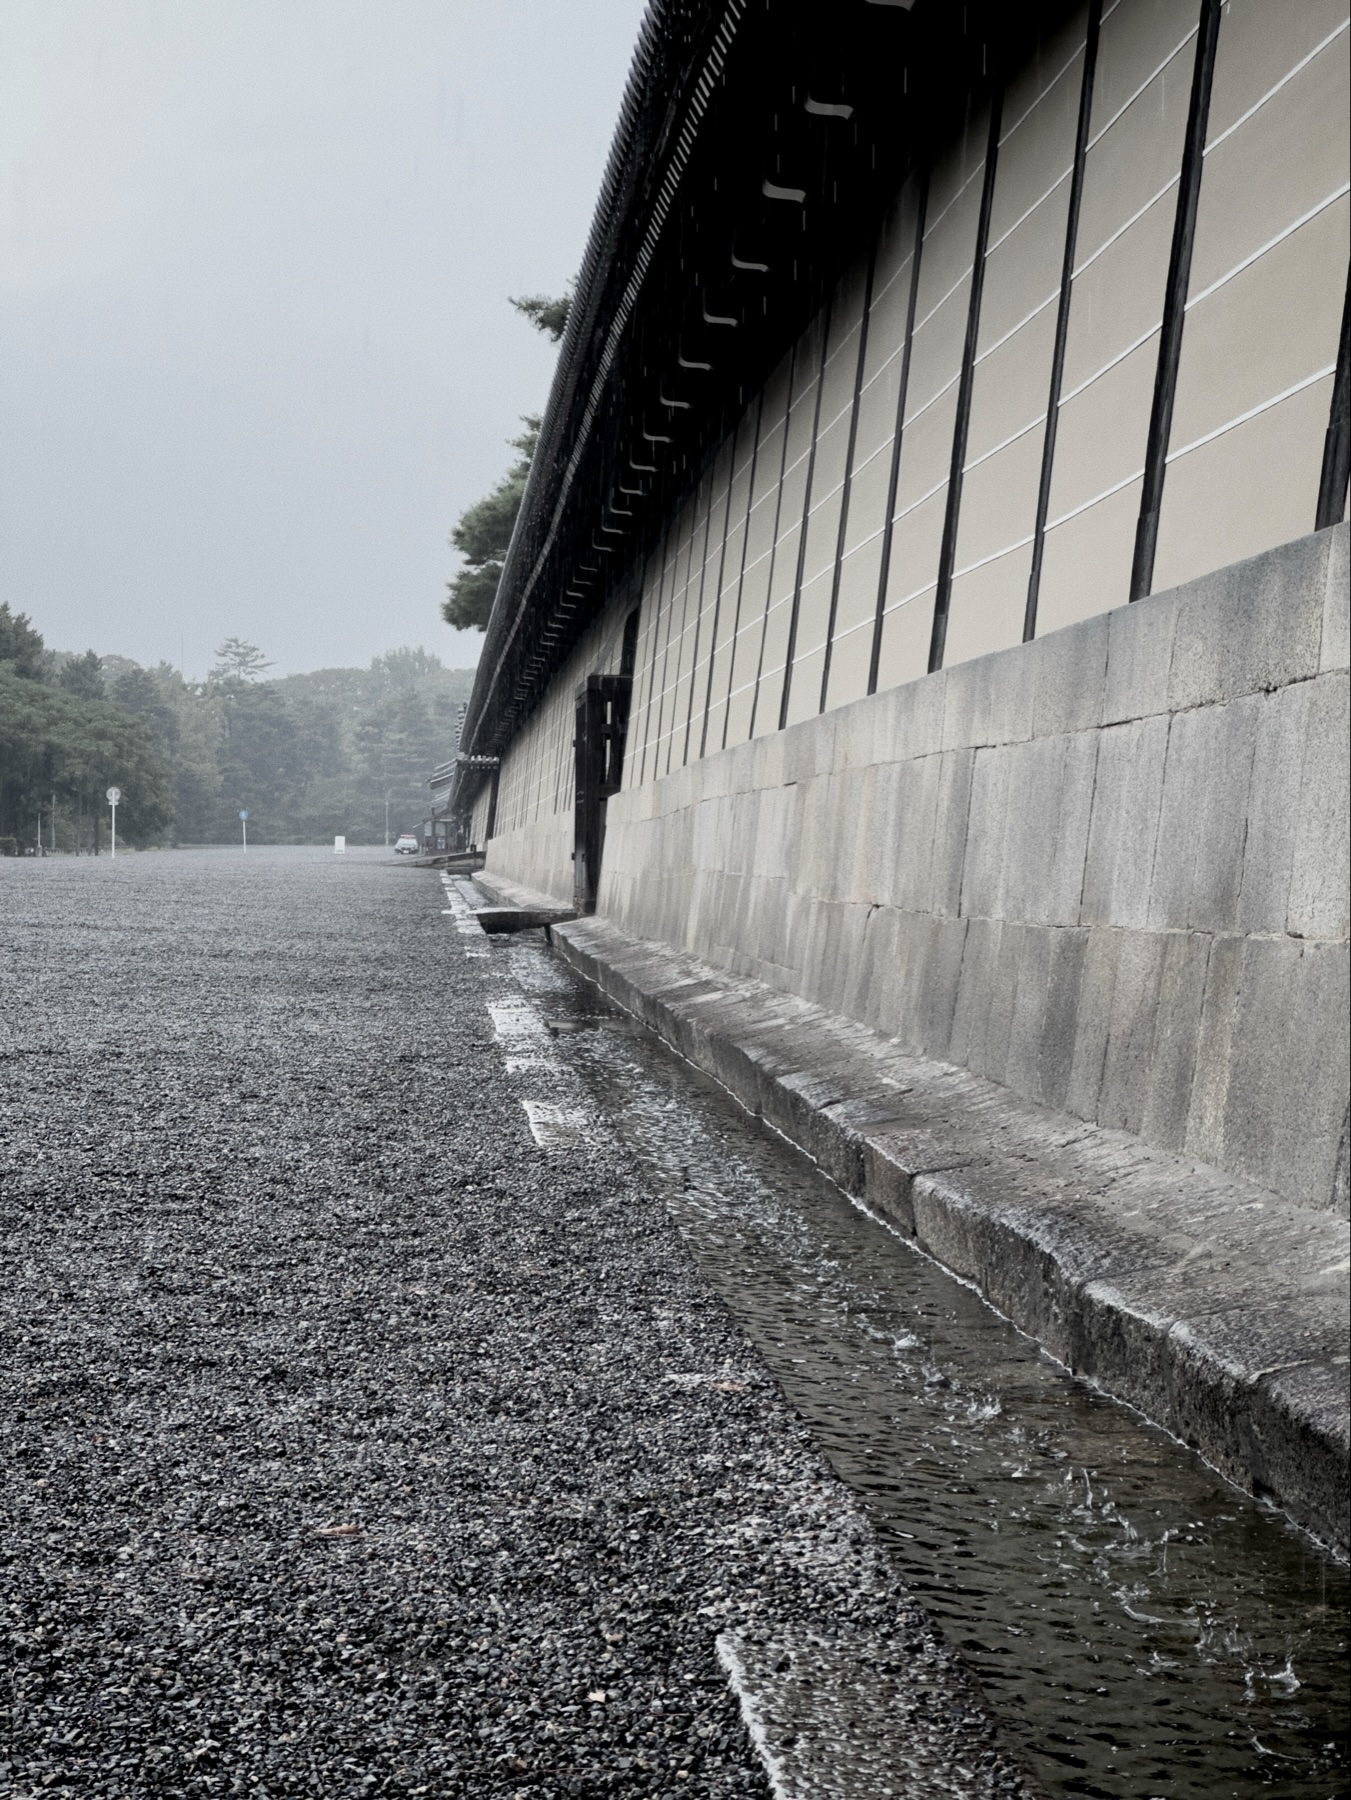 Rain pouring into the small moat of the imperial palace